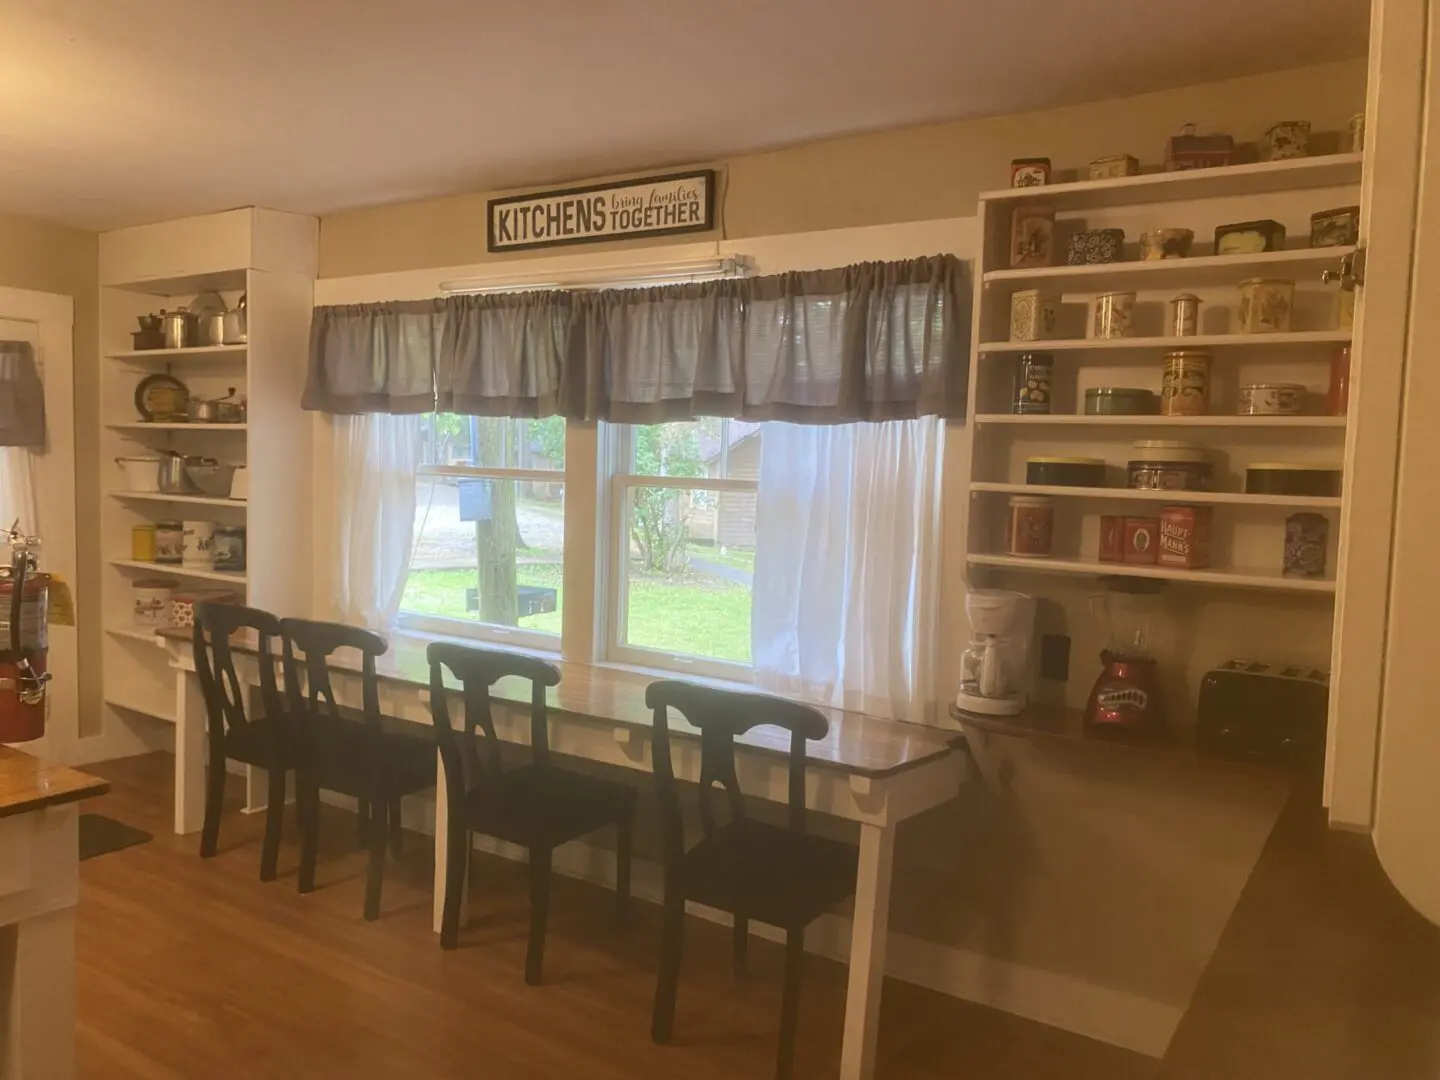 A dining room table with four chairs and two bookcases.